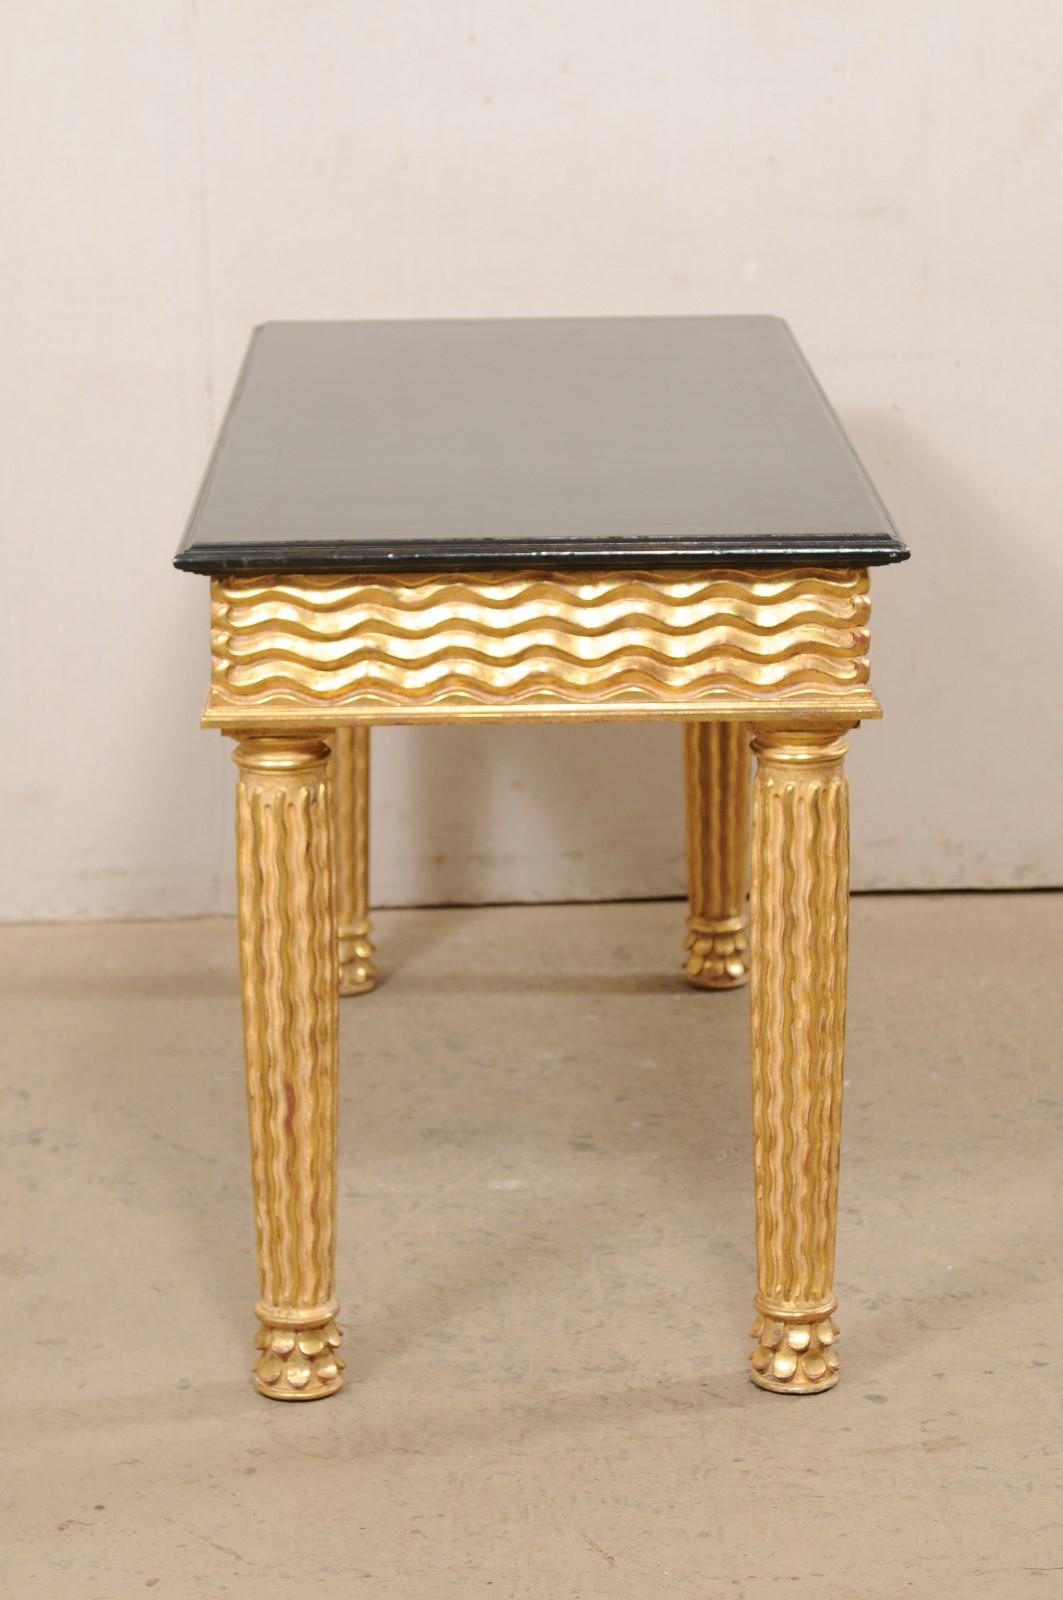 Italian Masterfully Hand-Carved Wooden Console Table with Real Gold Leafing For Sale 2